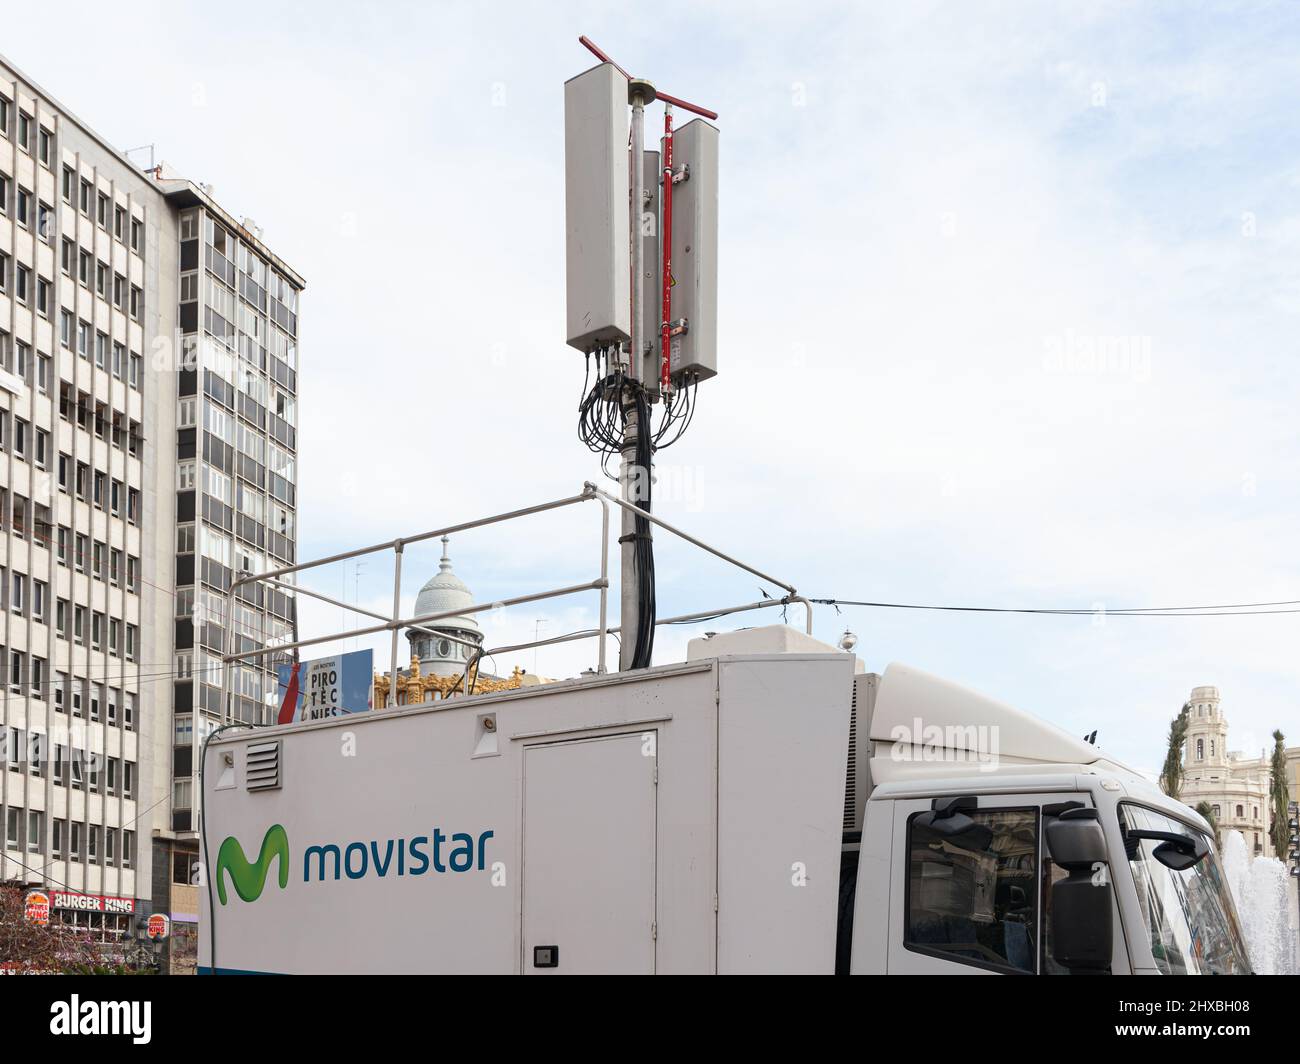 VALENCIA, SPAIN - MARCH 10, 2022: Movistar is a major telecommunications provider owned by Telefónica. Fallas Stock Photo